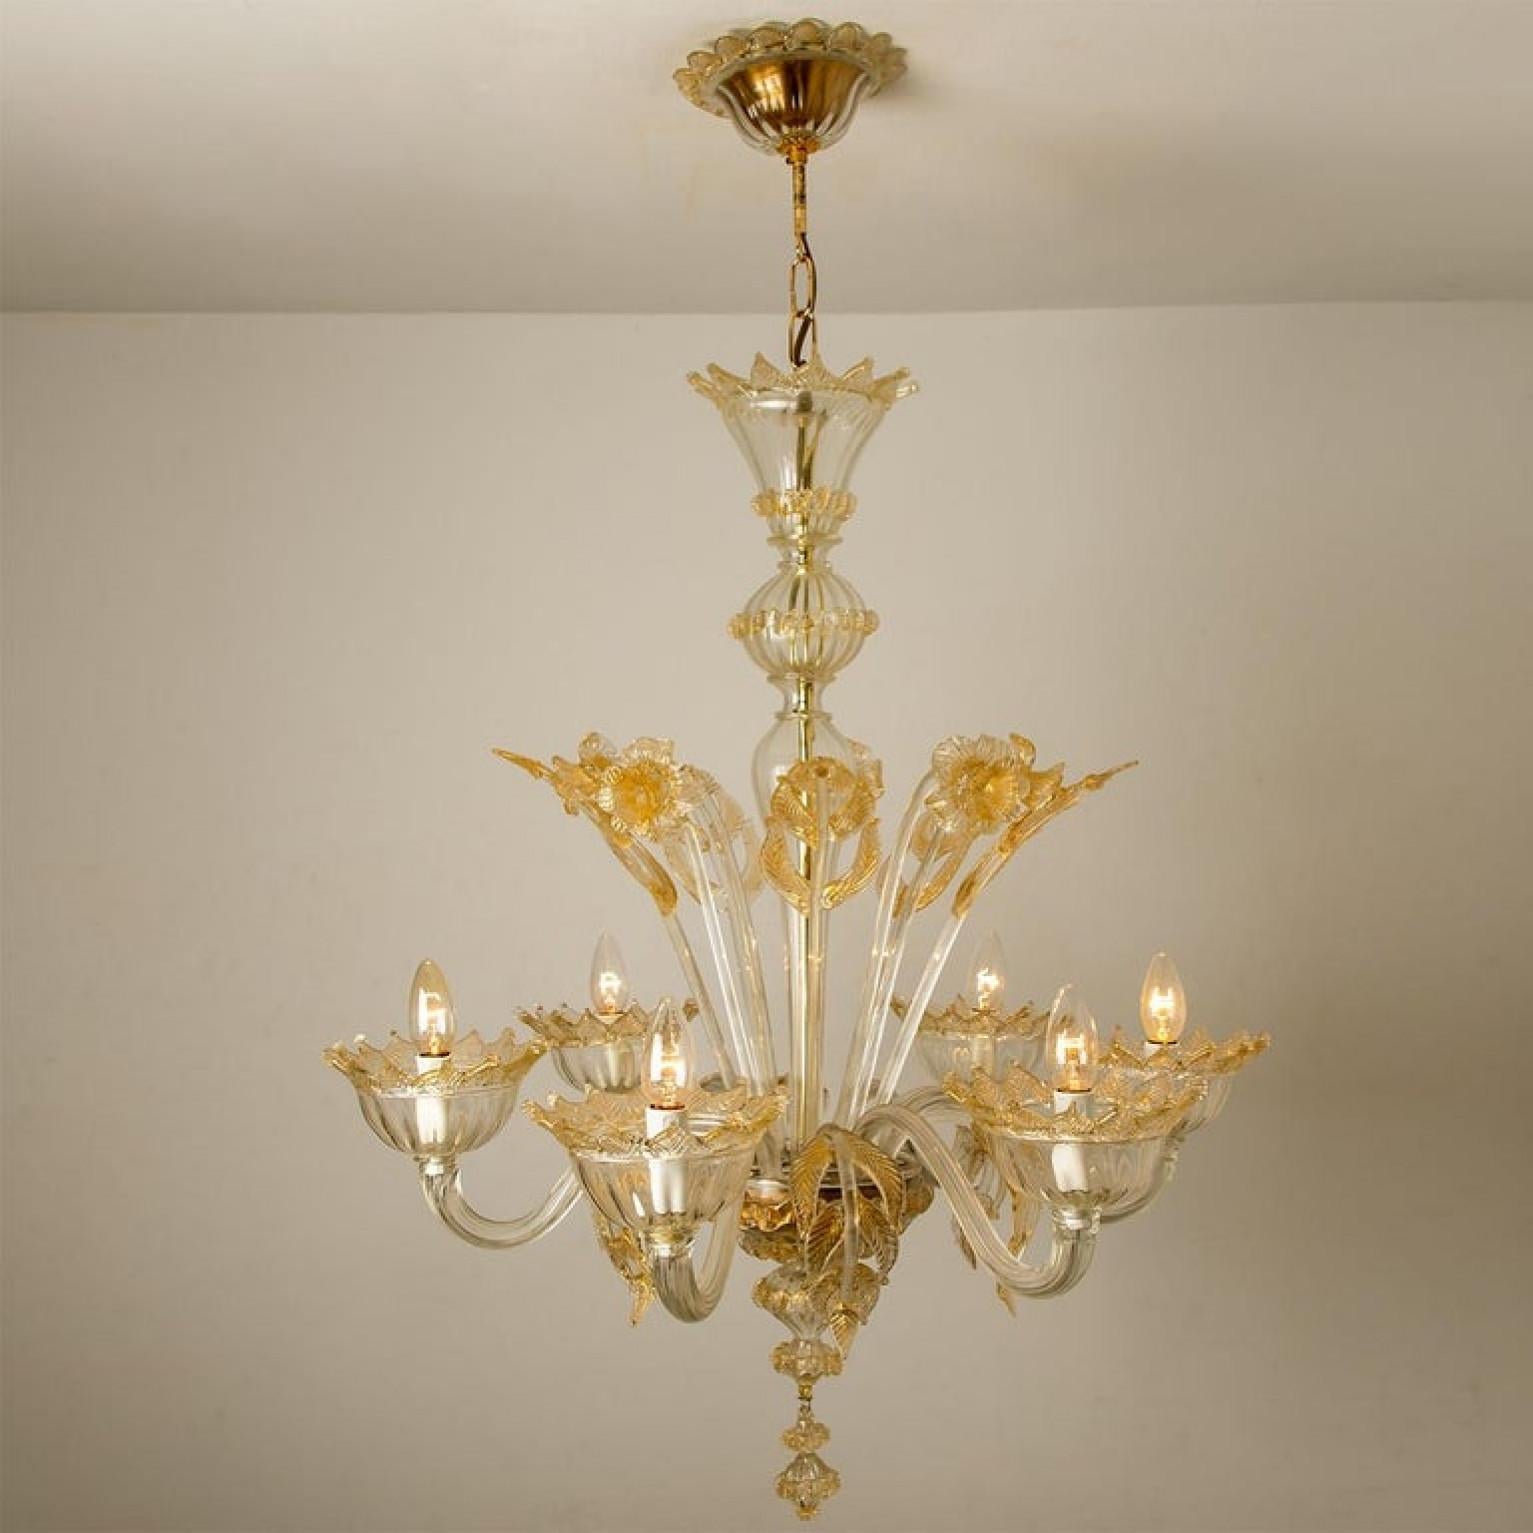 Large Venetian Chandelier in Gilded Murano Glass, by Barovier, 1950s For Sale 4